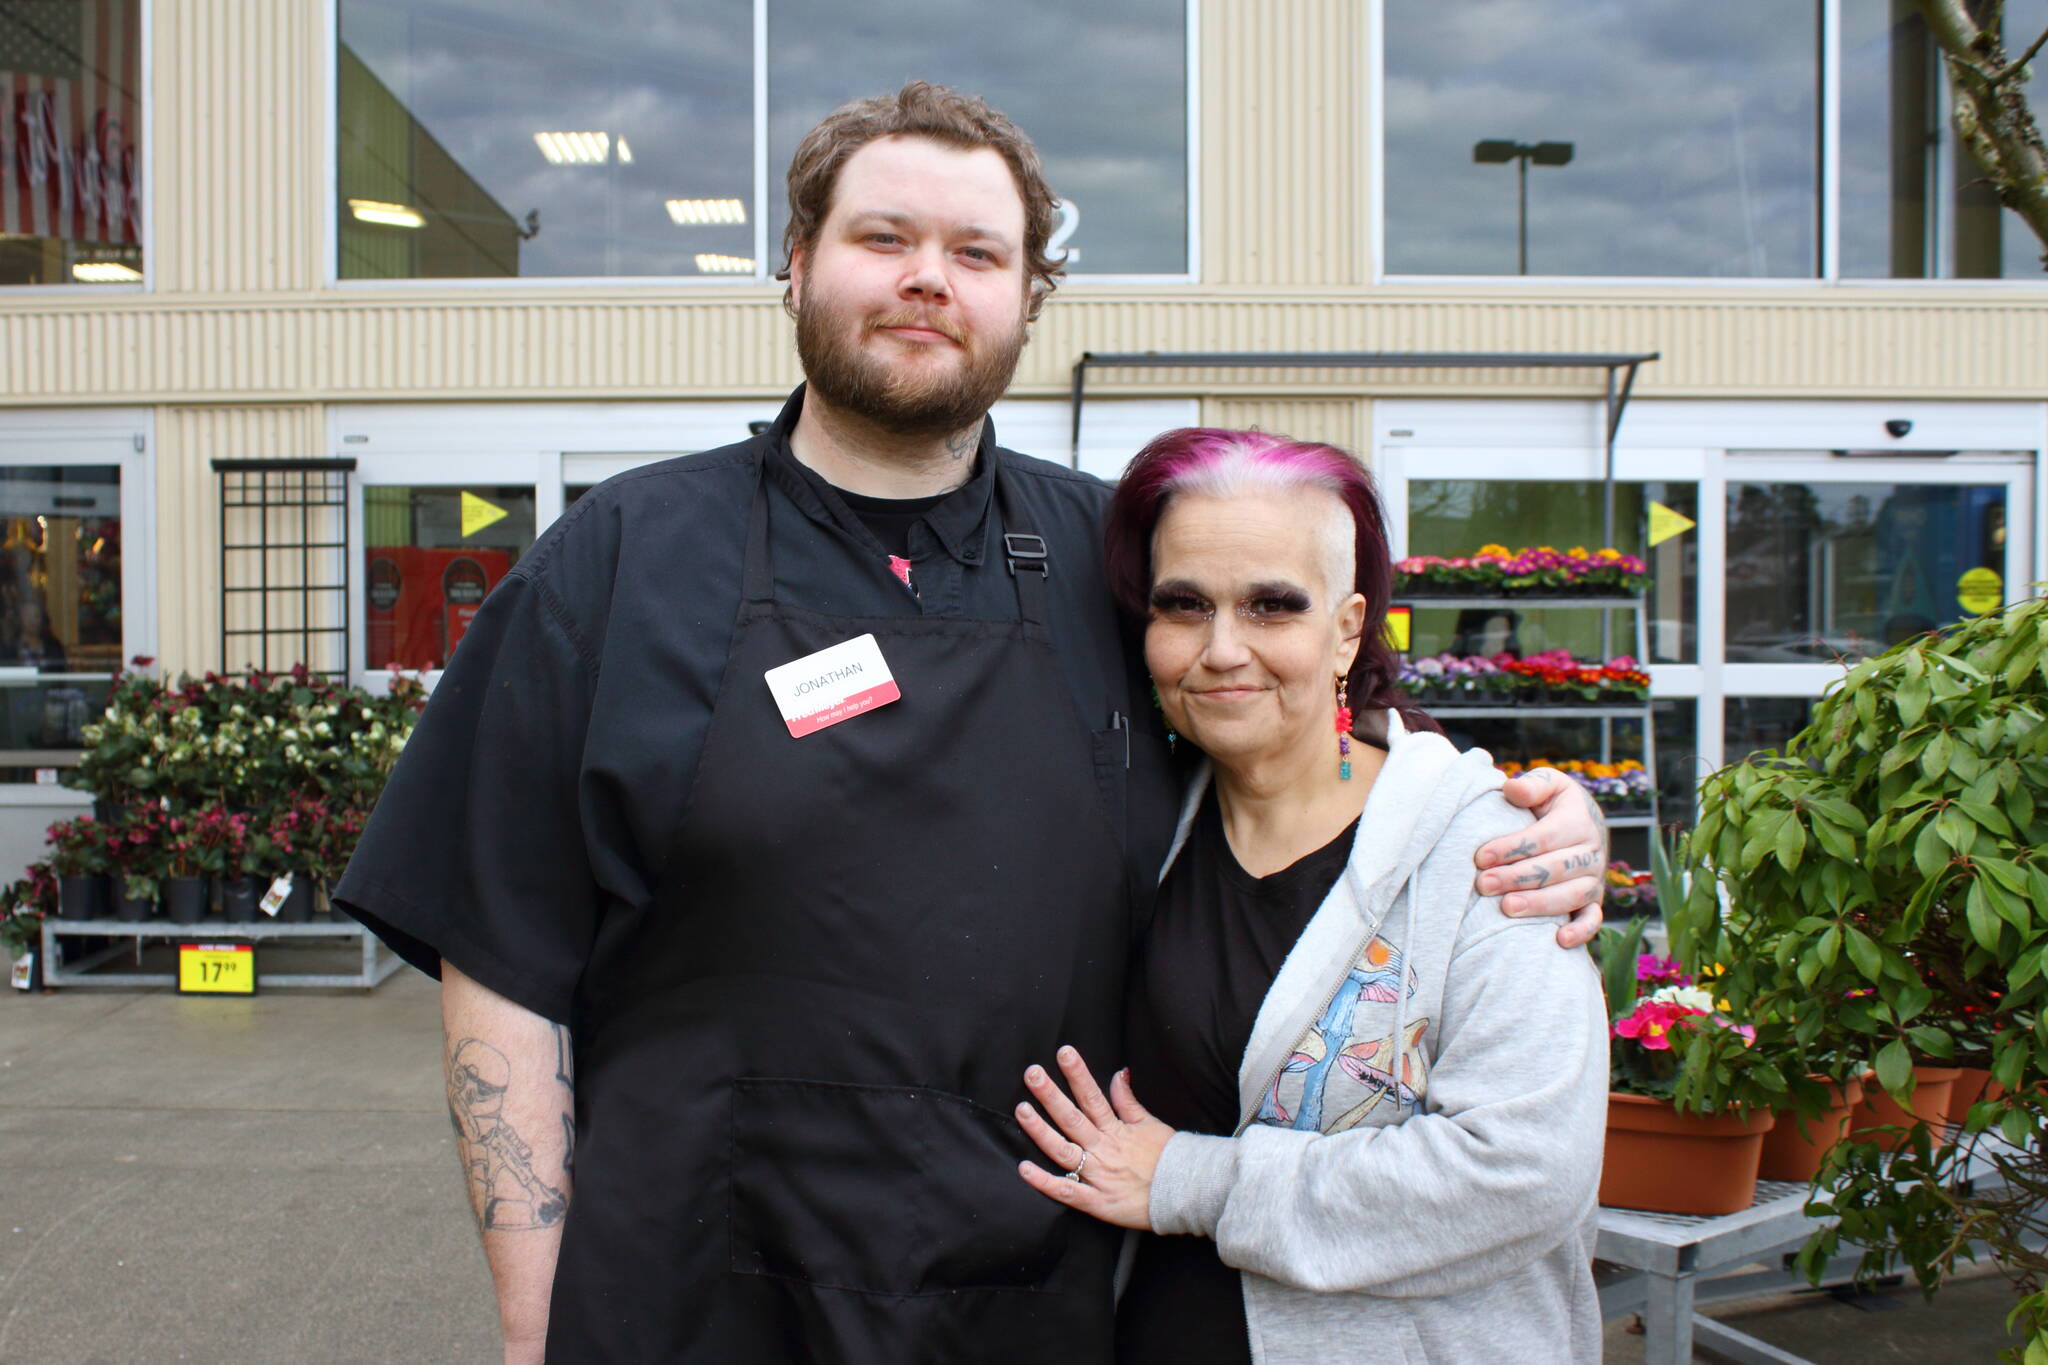 Jonathan Verbiscar and wife Lori Kline at the Fred Meyer where they now work together. Jonathan is the first graduate from FUSION’s new job skills program, which helped him secure his job and find more stability for the couple and their daughter. Photo by Keelin Everly-Lang/The Mirror